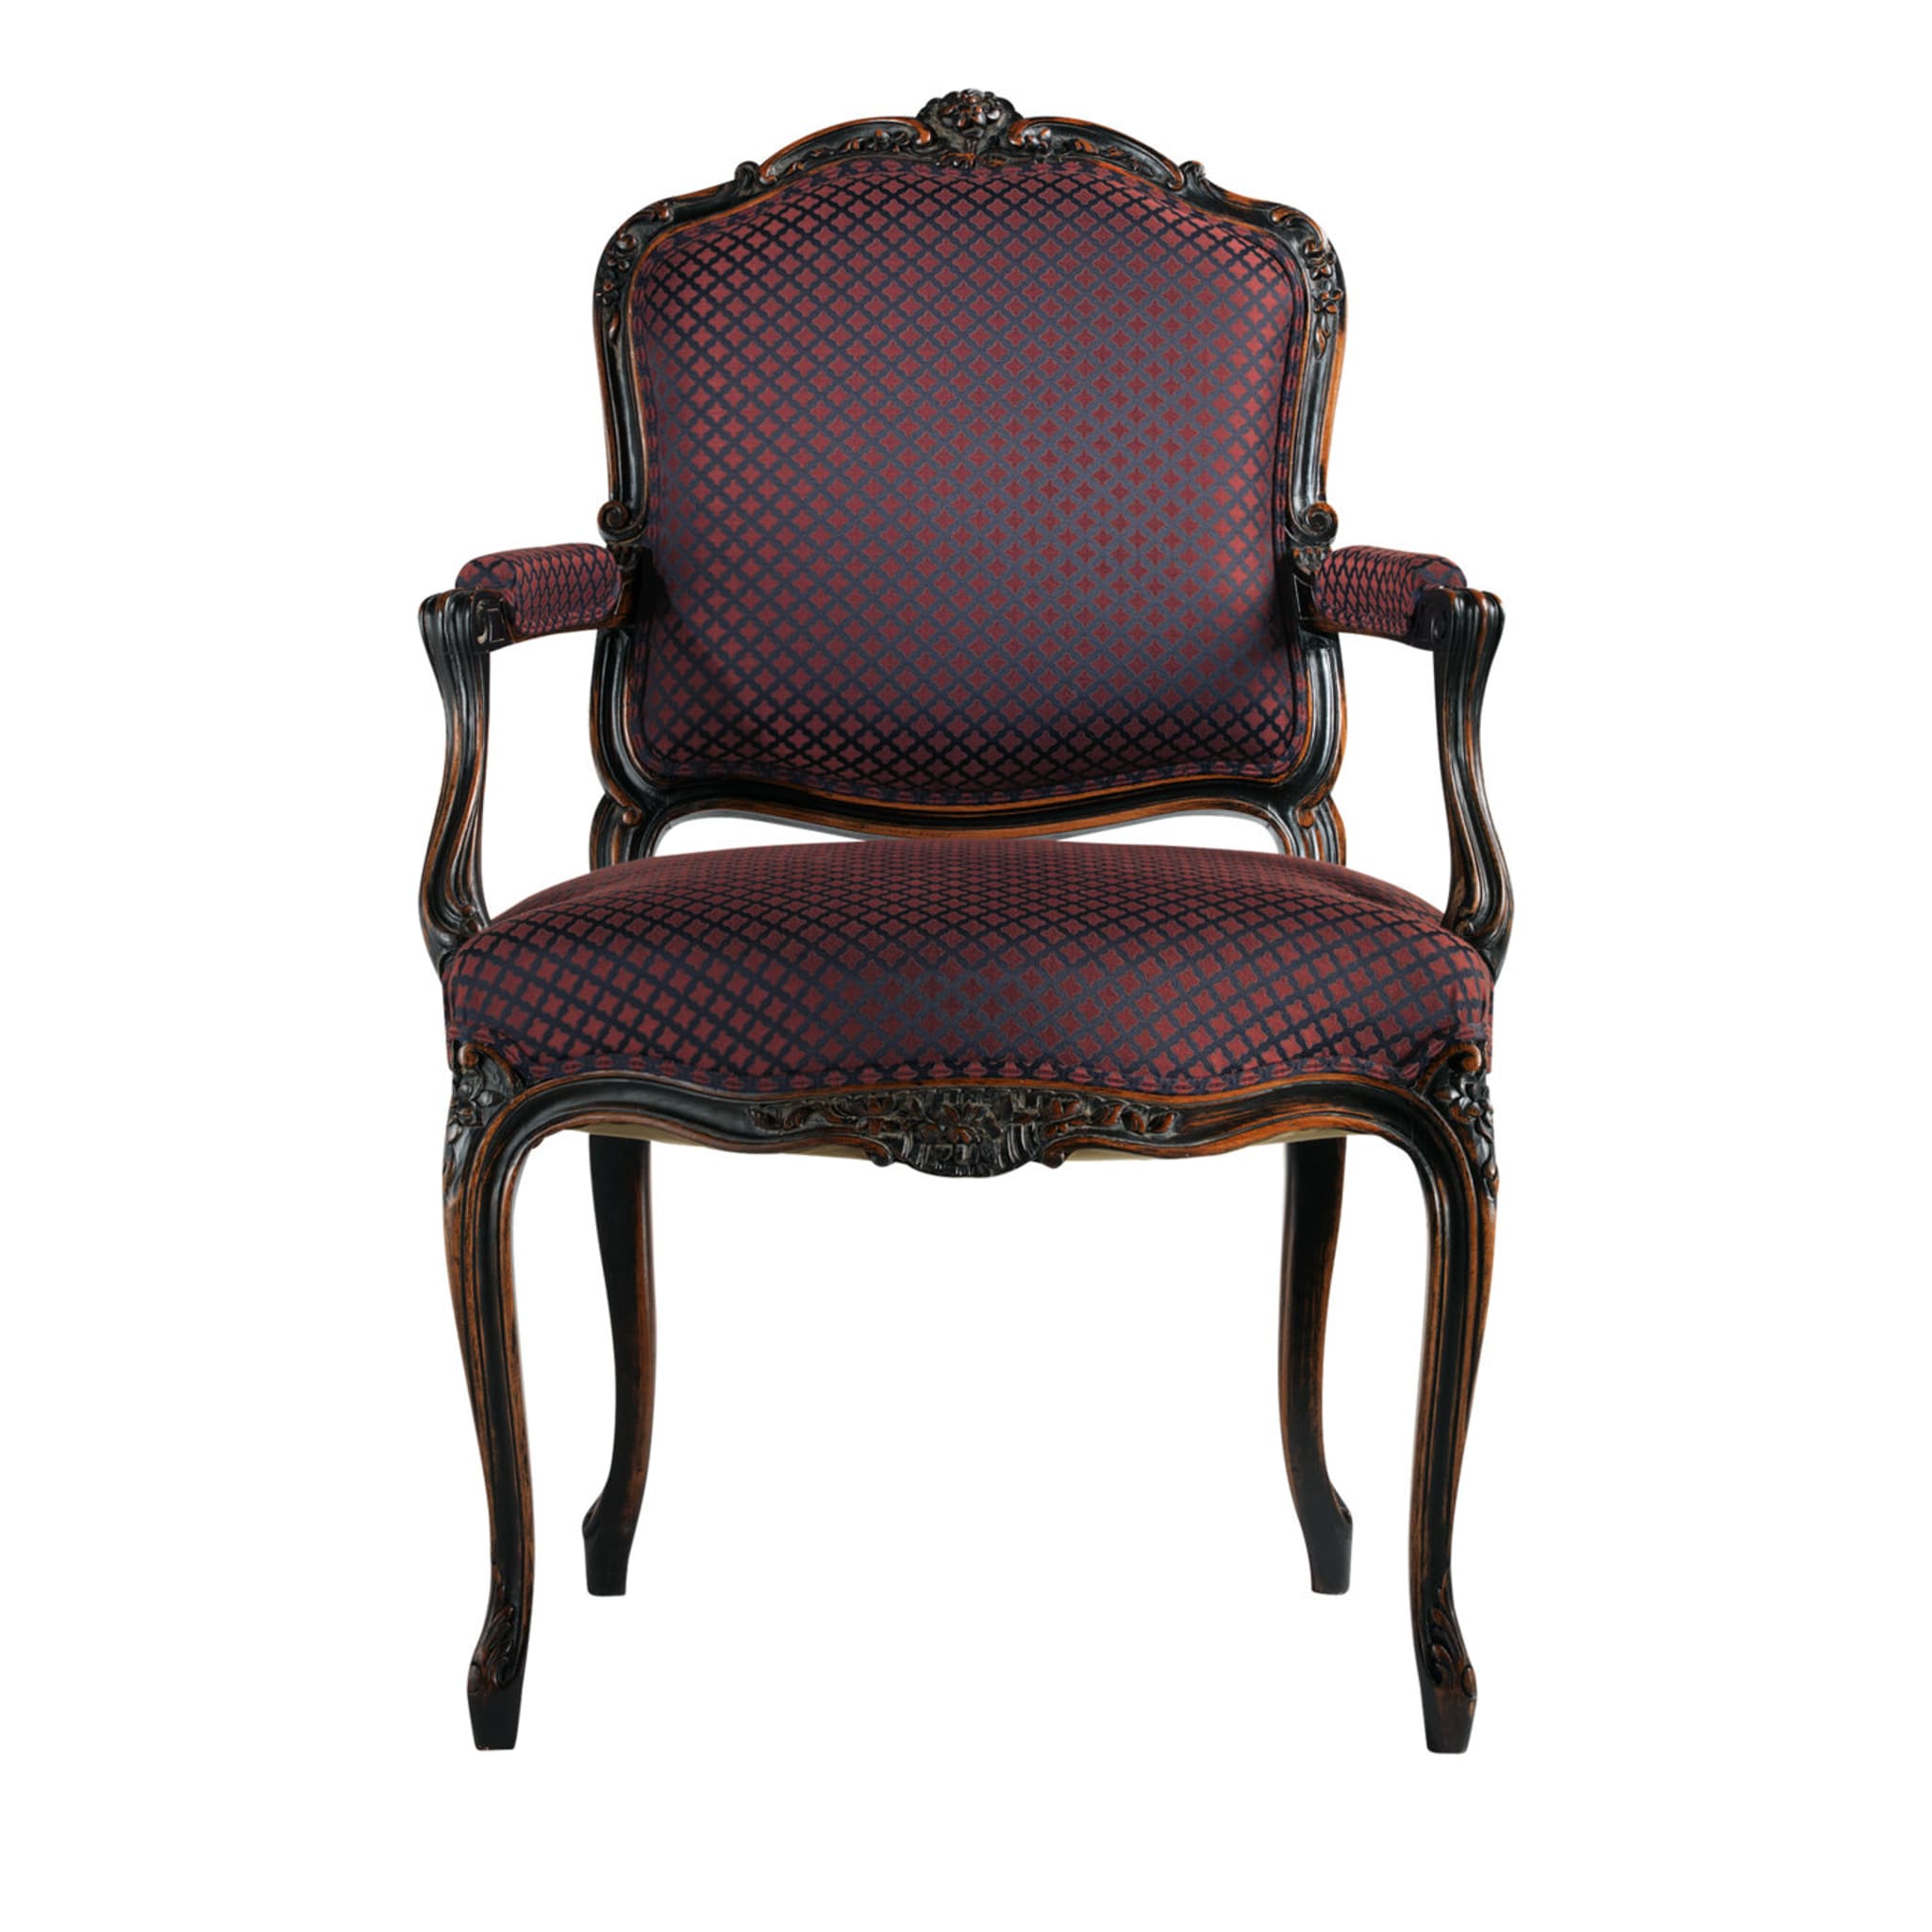 Carved Chair With Armrests Louis XV #1 - Main view